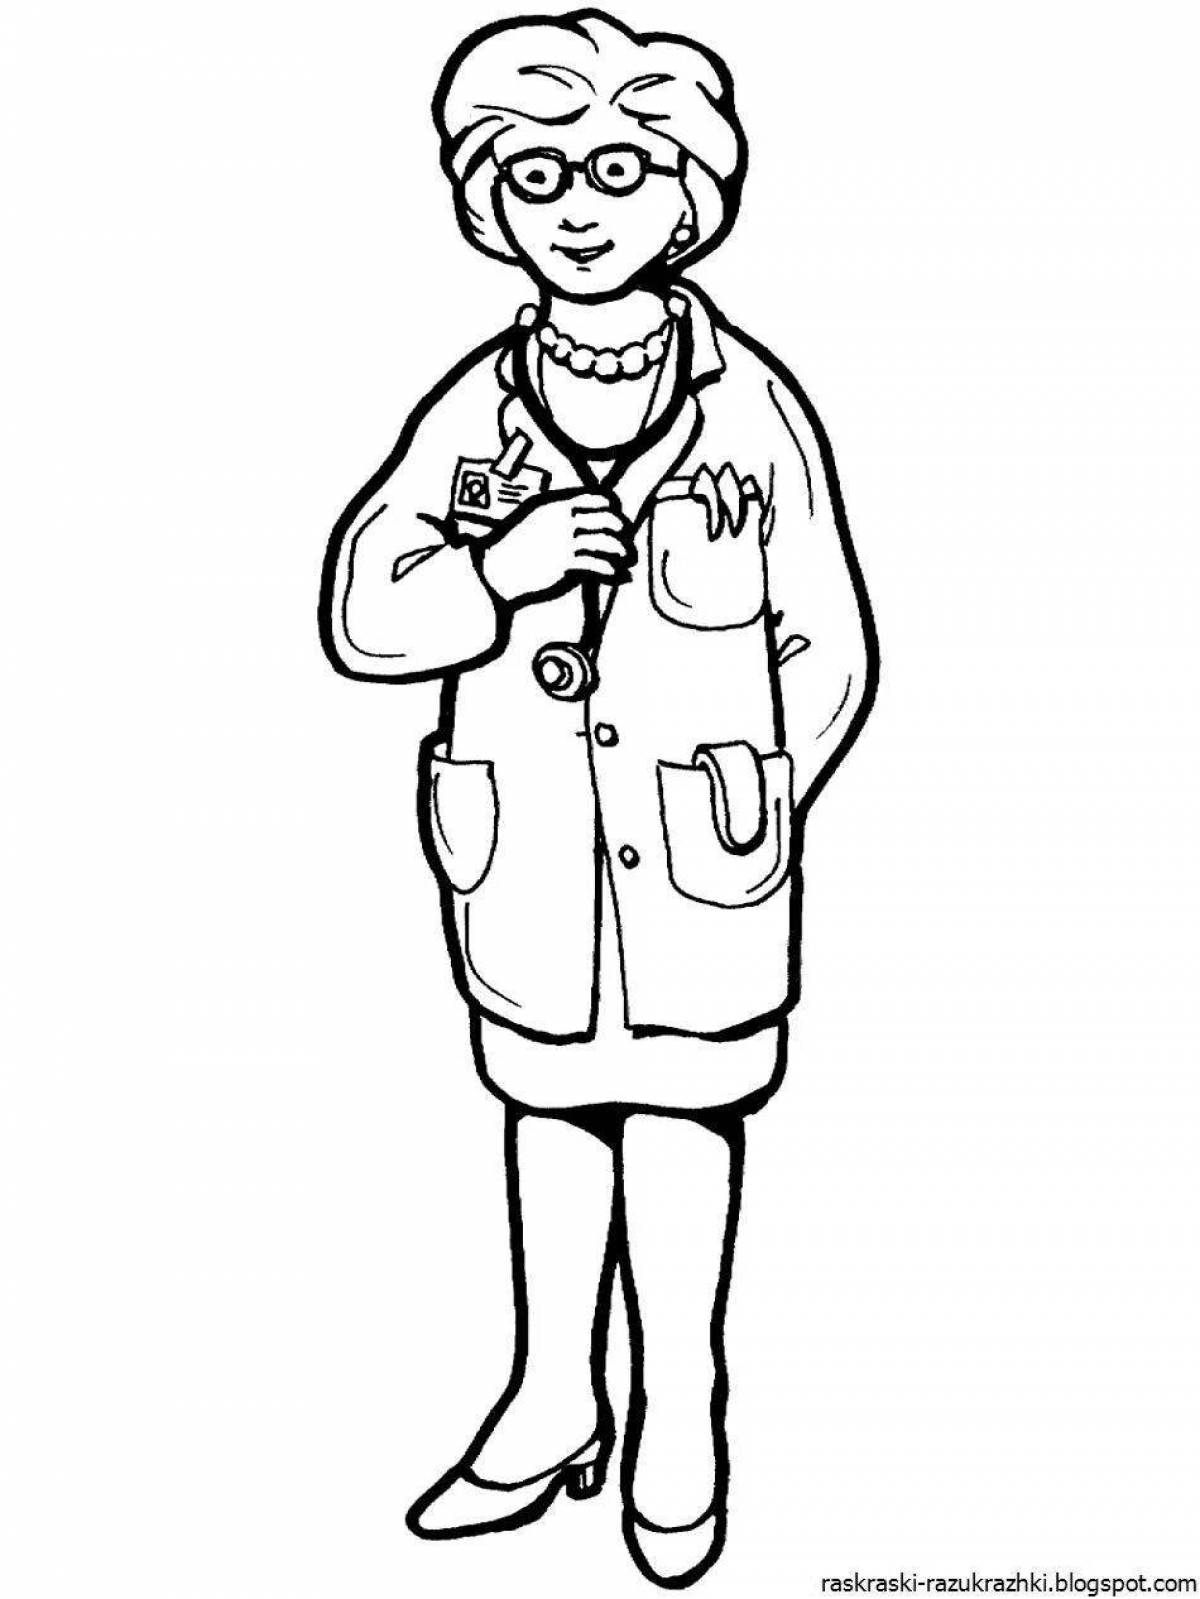 Playful doctor coloring page for kids